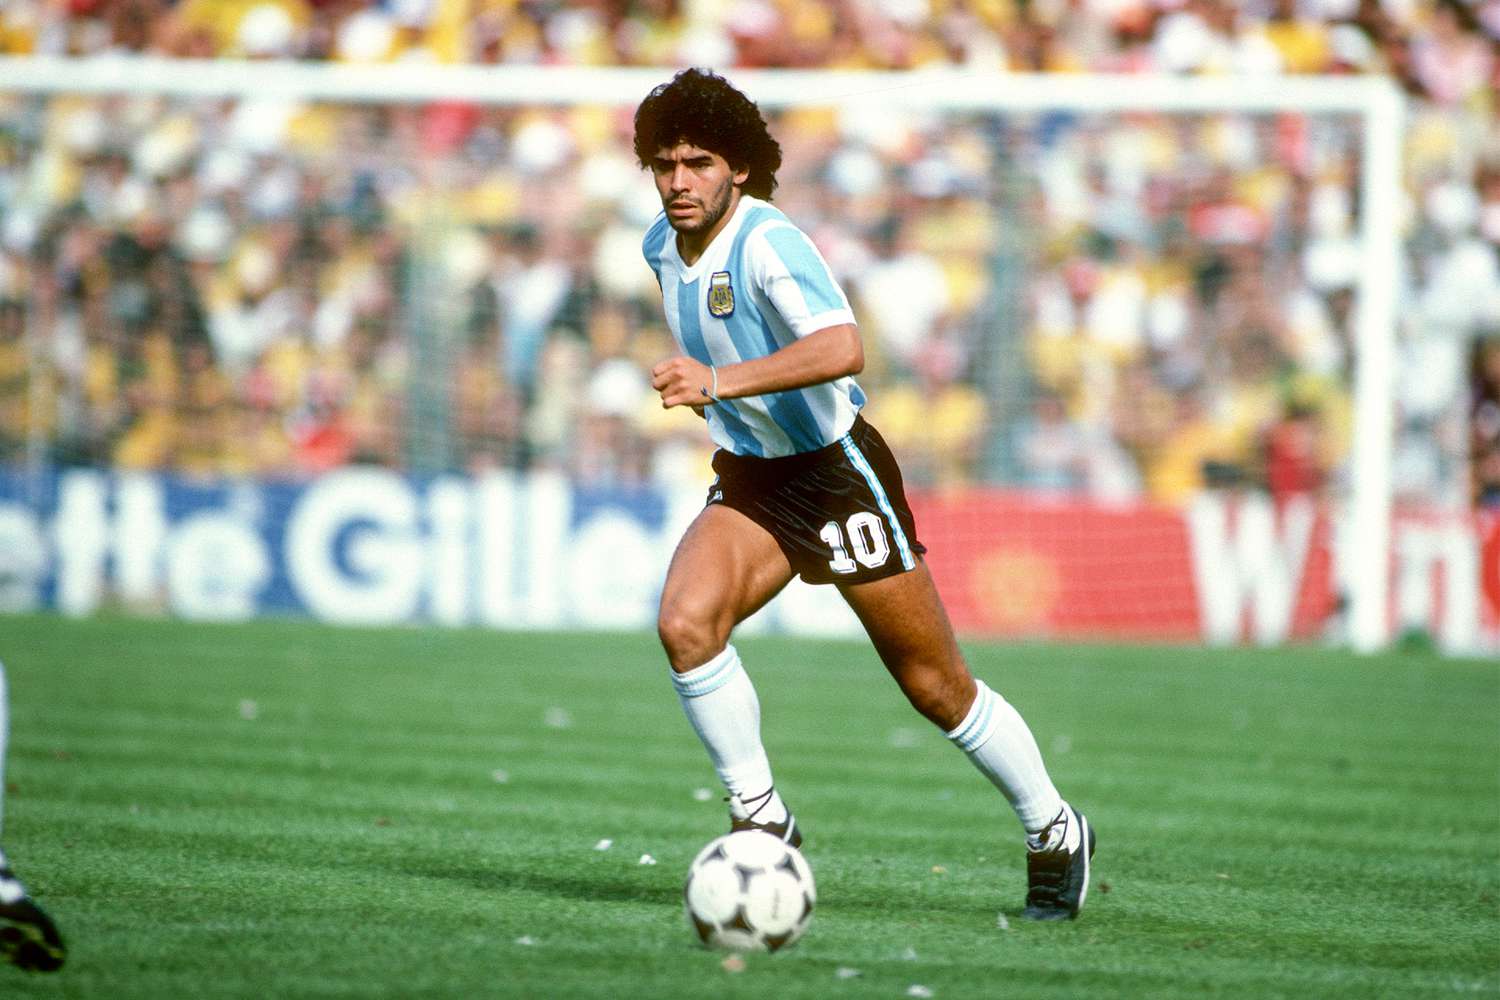 Argentinian Diego Maradona in action for Napoli timesnews24.in